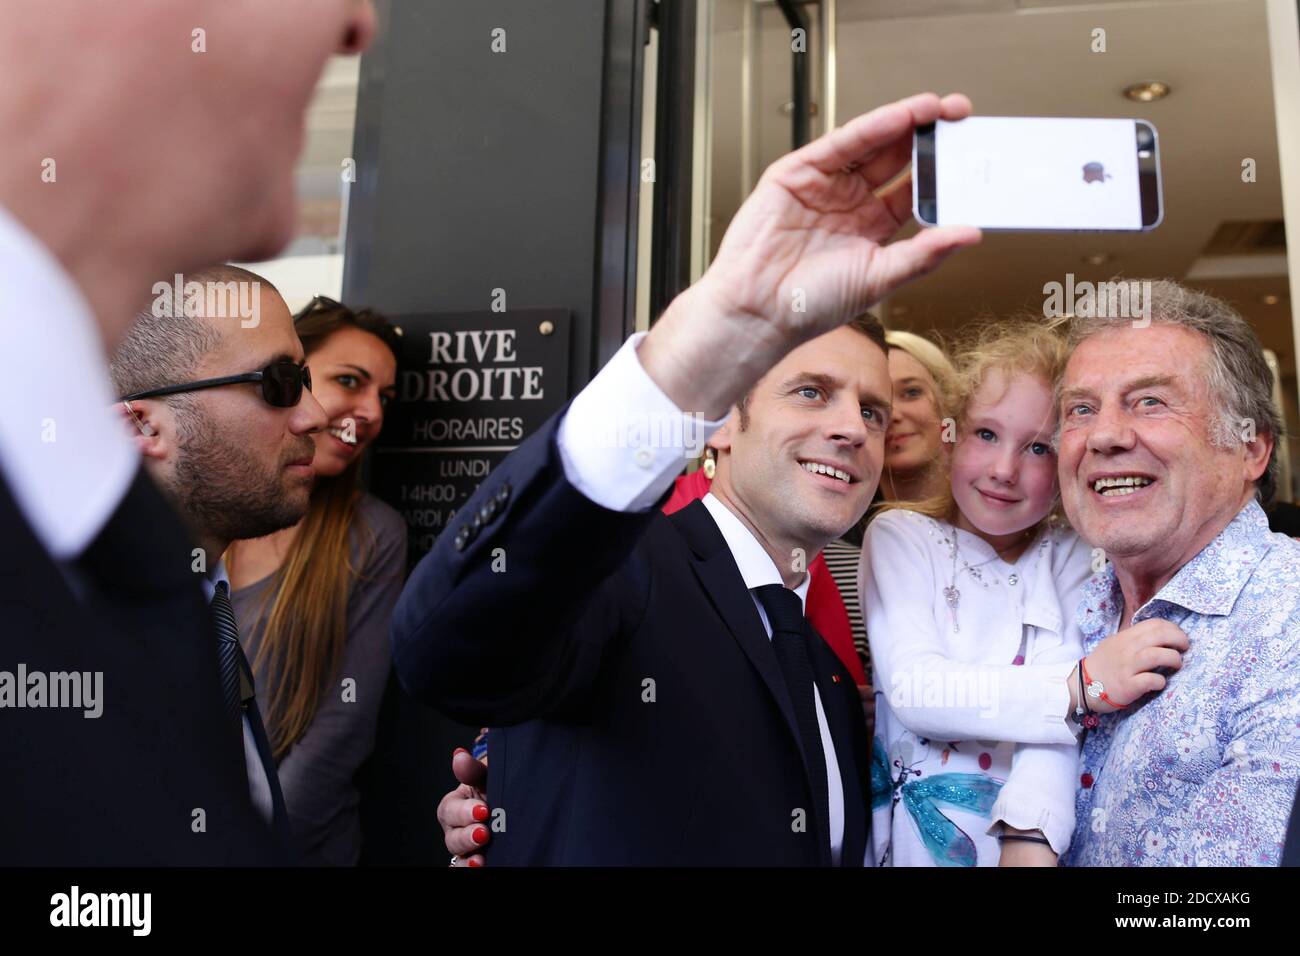 French President Emmanuel Macron visits the 'Cœur de ville' area in Saint-Die-des-Vosges, eastern France, as part of a three-day-visit in the region on april 18th 2018. Photo by le Mouton/ABACAPRESS.COM Stock Photo